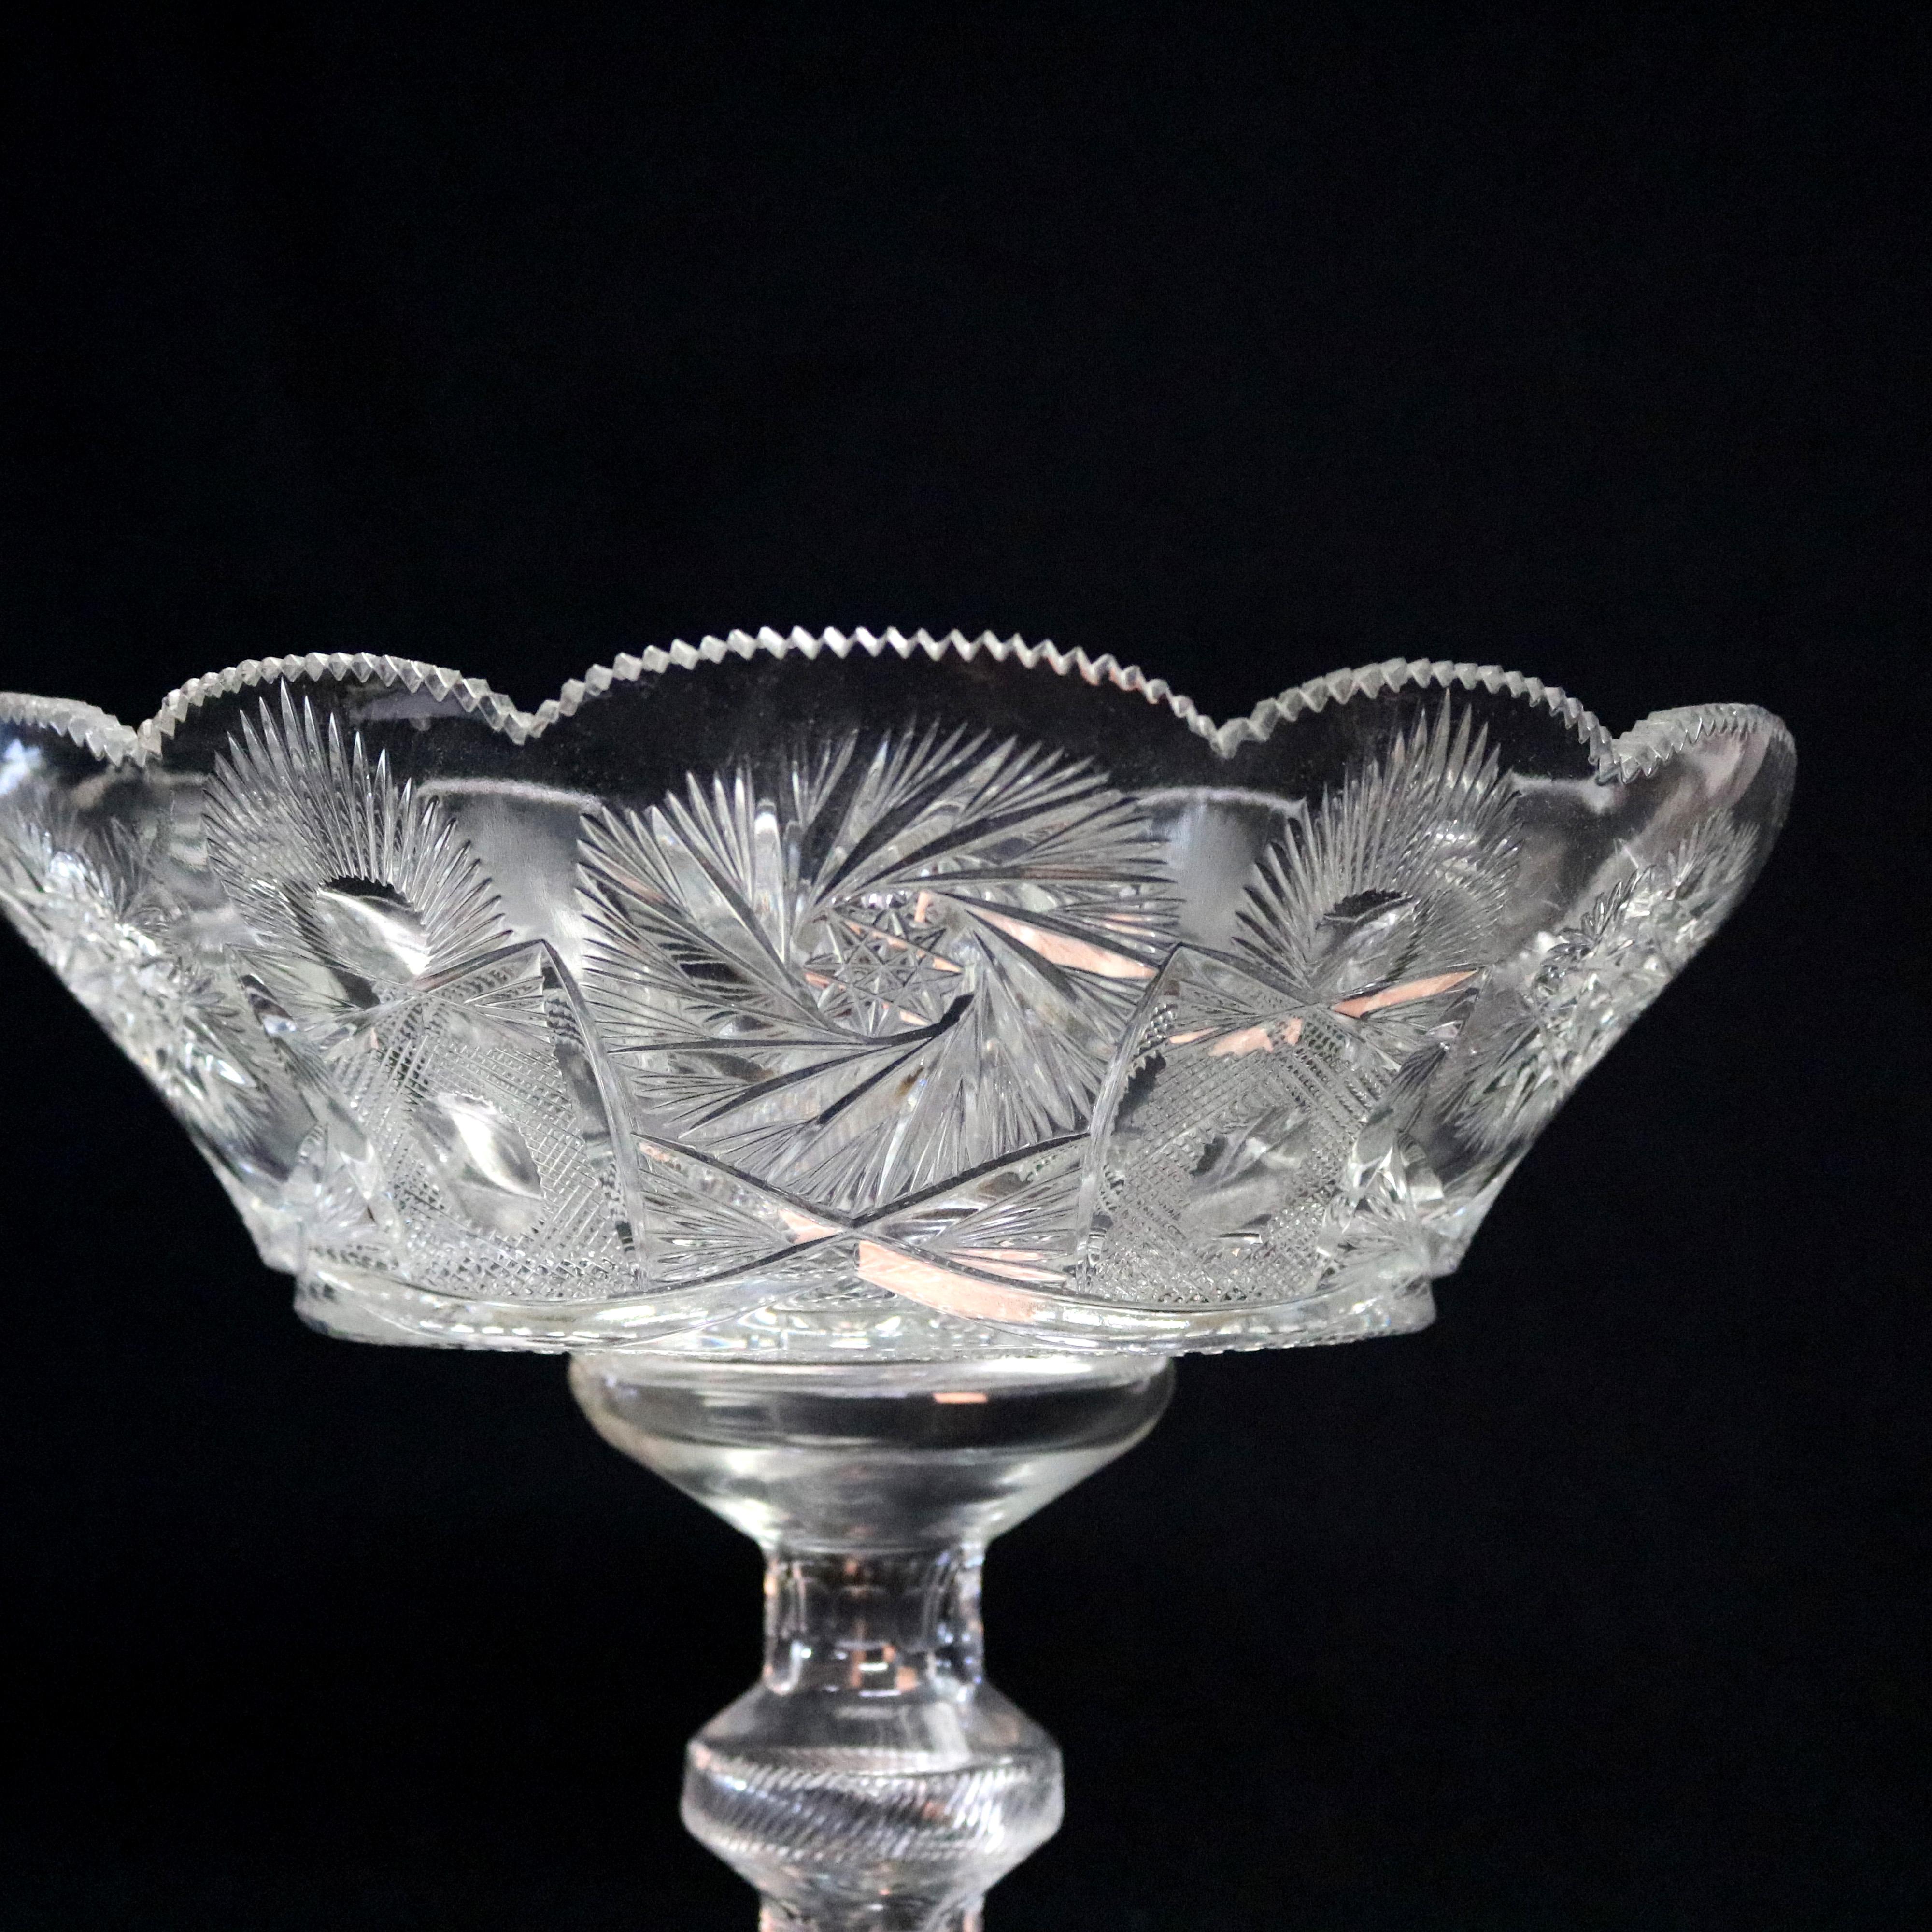 An antique Russian cut crystal center compote offers flare and faceted bowl with scalloped rim and facets having alternating cut star and pinwheel pattern, raised on pedestal seated on stepped base, Artist-signed as photographed, circa